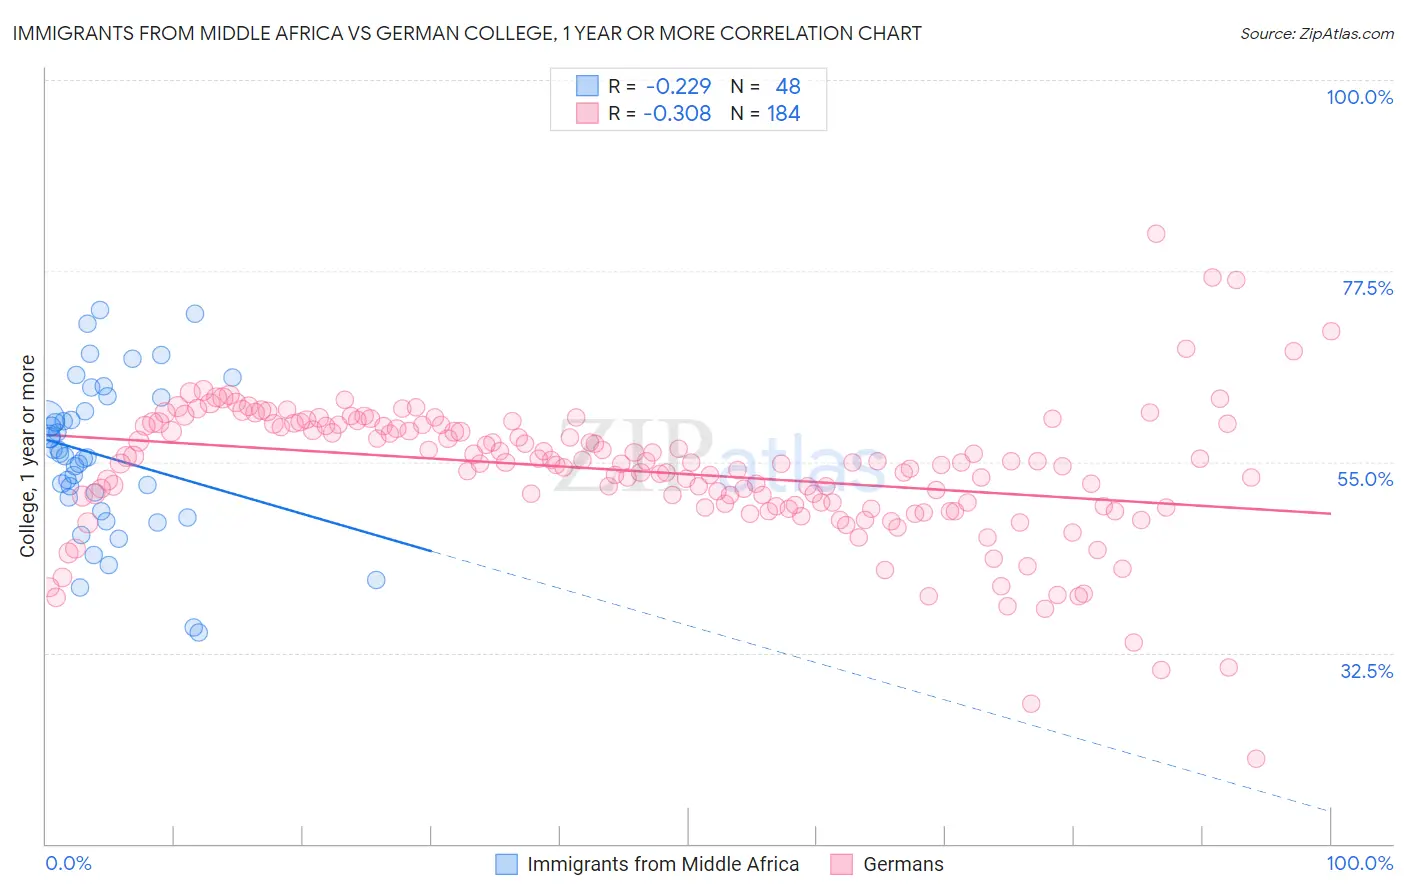 Immigrants from Middle Africa vs German College, 1 year or more